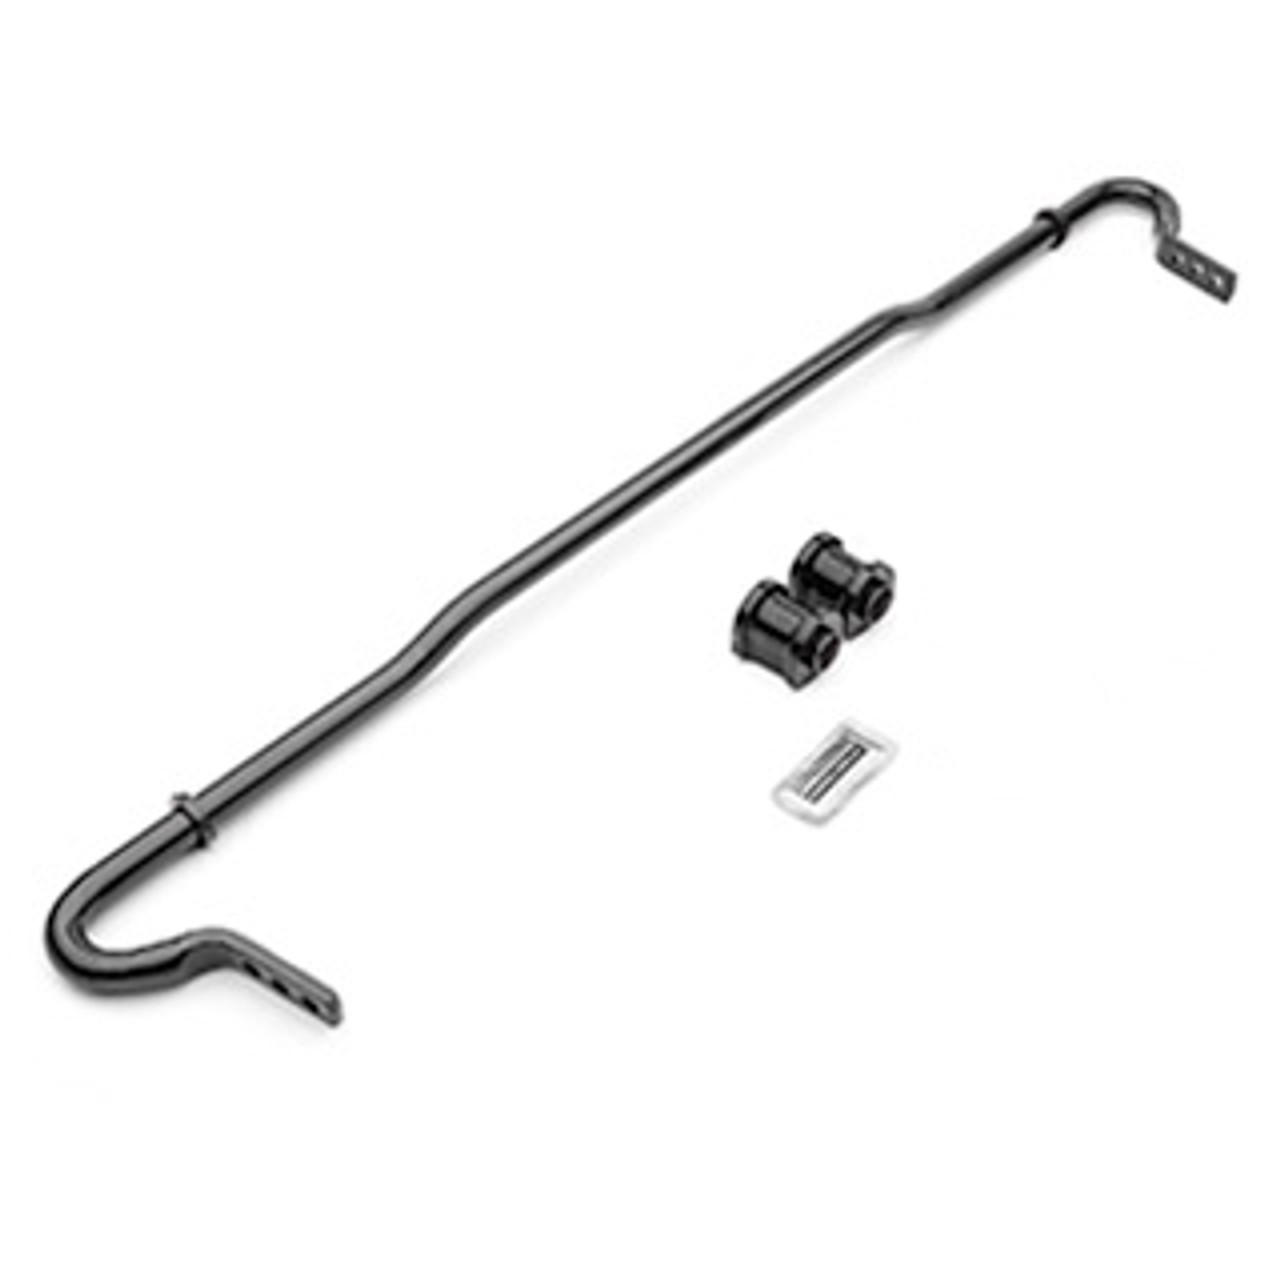 SUBARU COMPETITION READY SUSPENSION PACKAGE - REAR SWAY BAR 24MM - 3 POSITION ADJUSTABLE